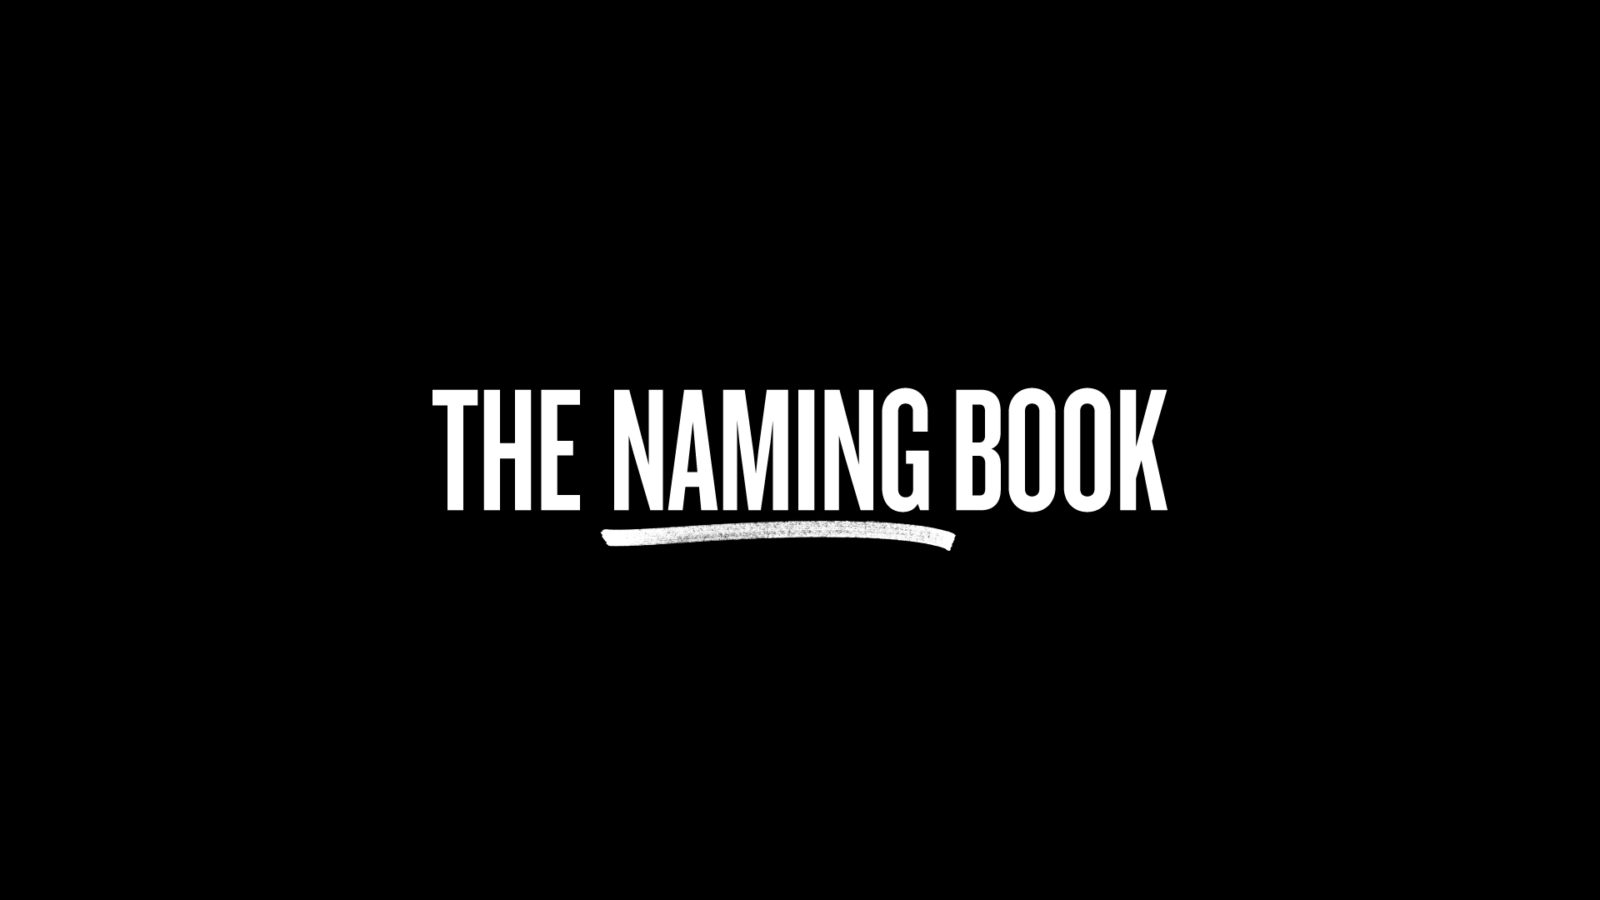 The Naming Book Title Design